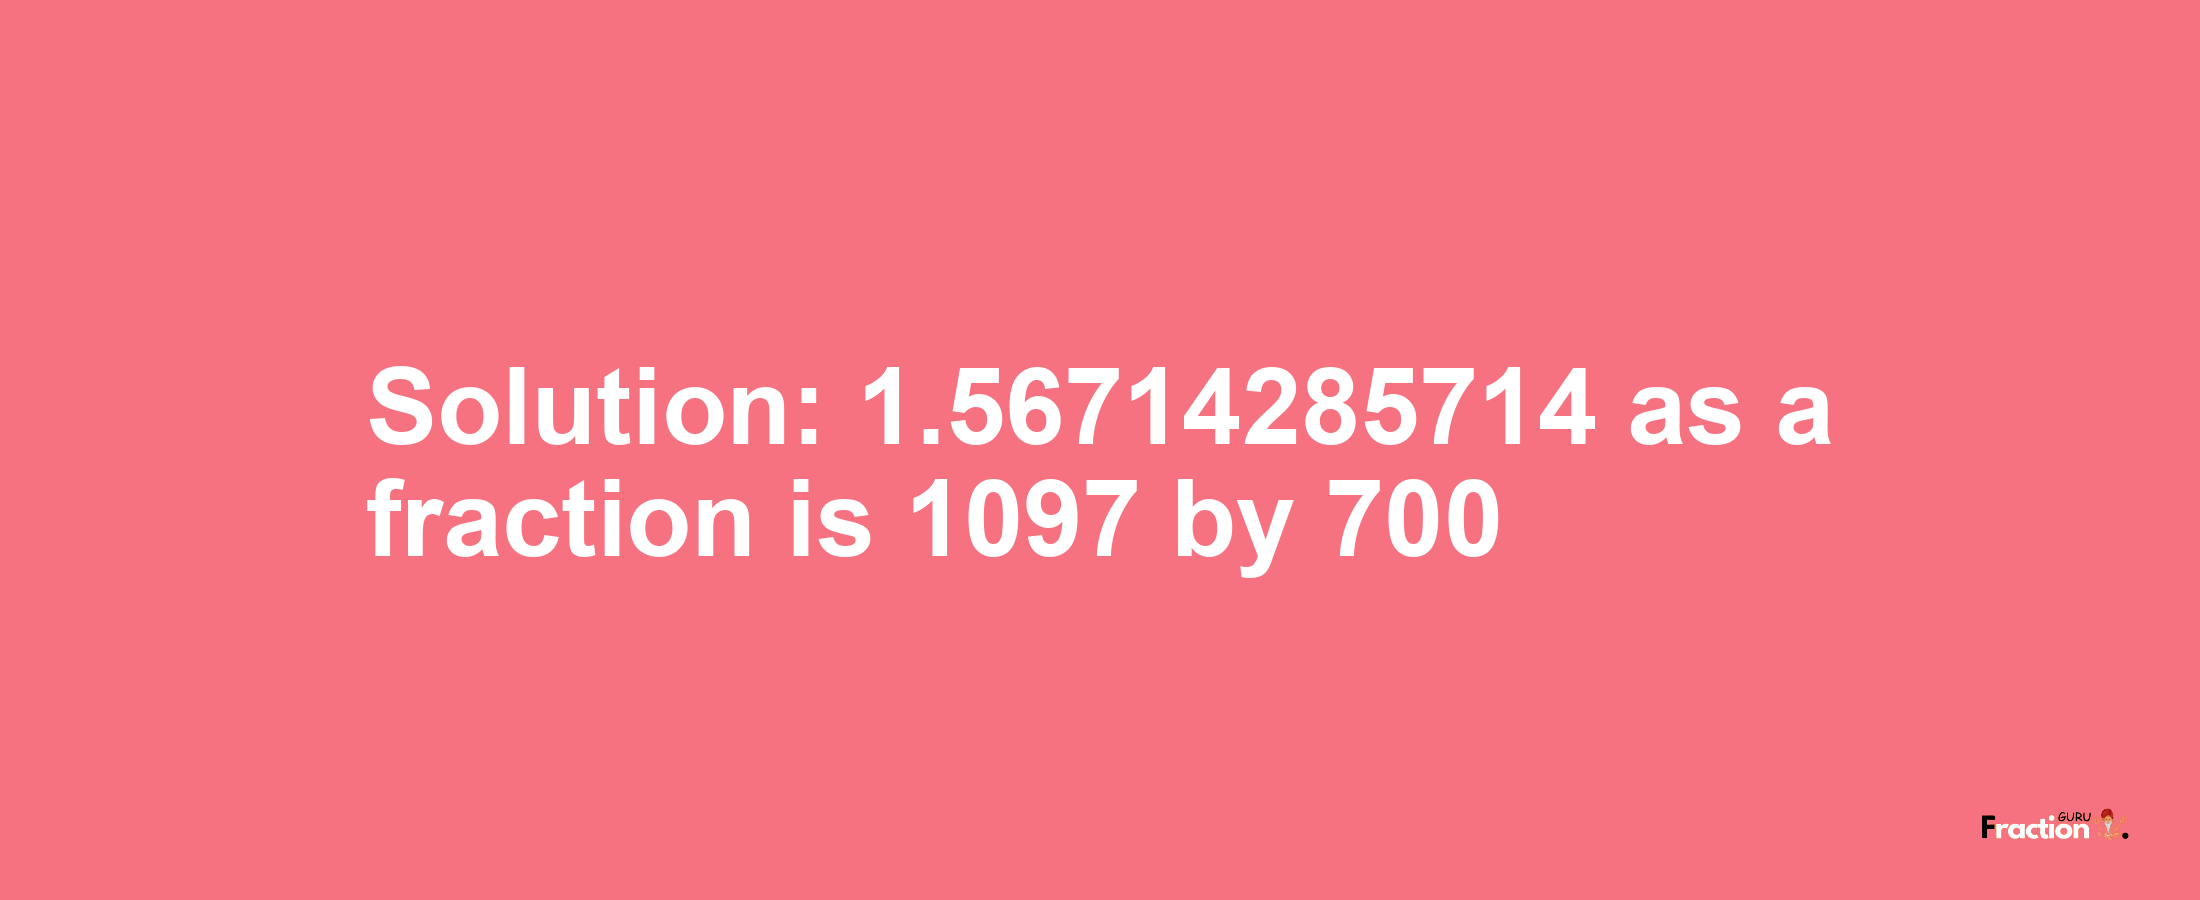 Solution:1.56714285714 as a fraction is 1097/700